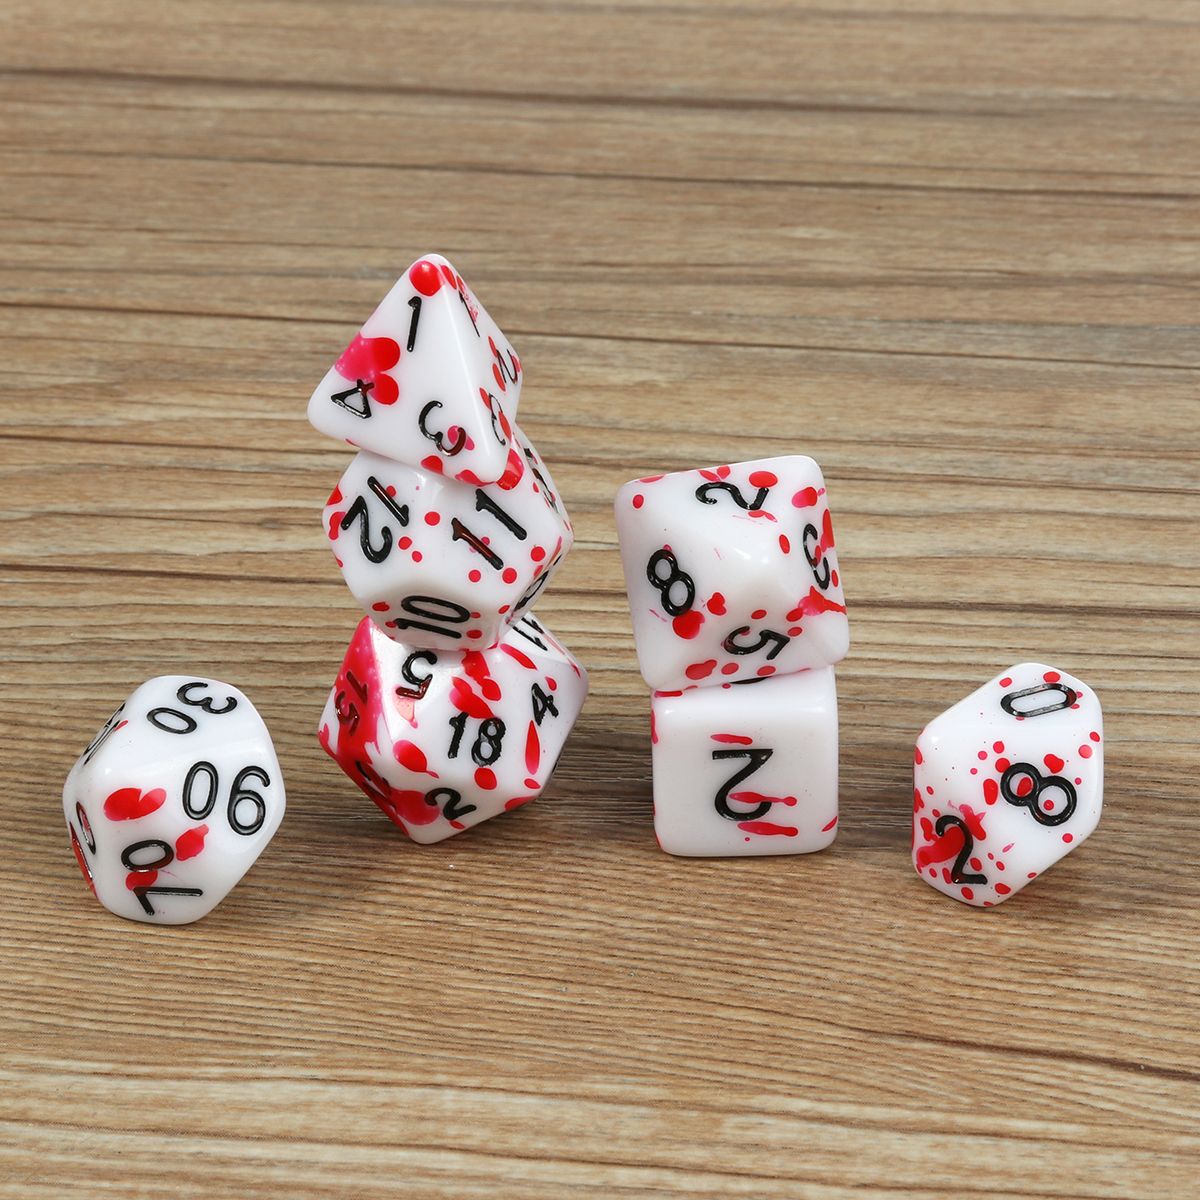 7PCS-Bloody-Color-Polyhedral-Dices-Die-Dice-Set-for-DungeonsampDragons-DND-RPG-MTG-Board-Role-Playin-1642272